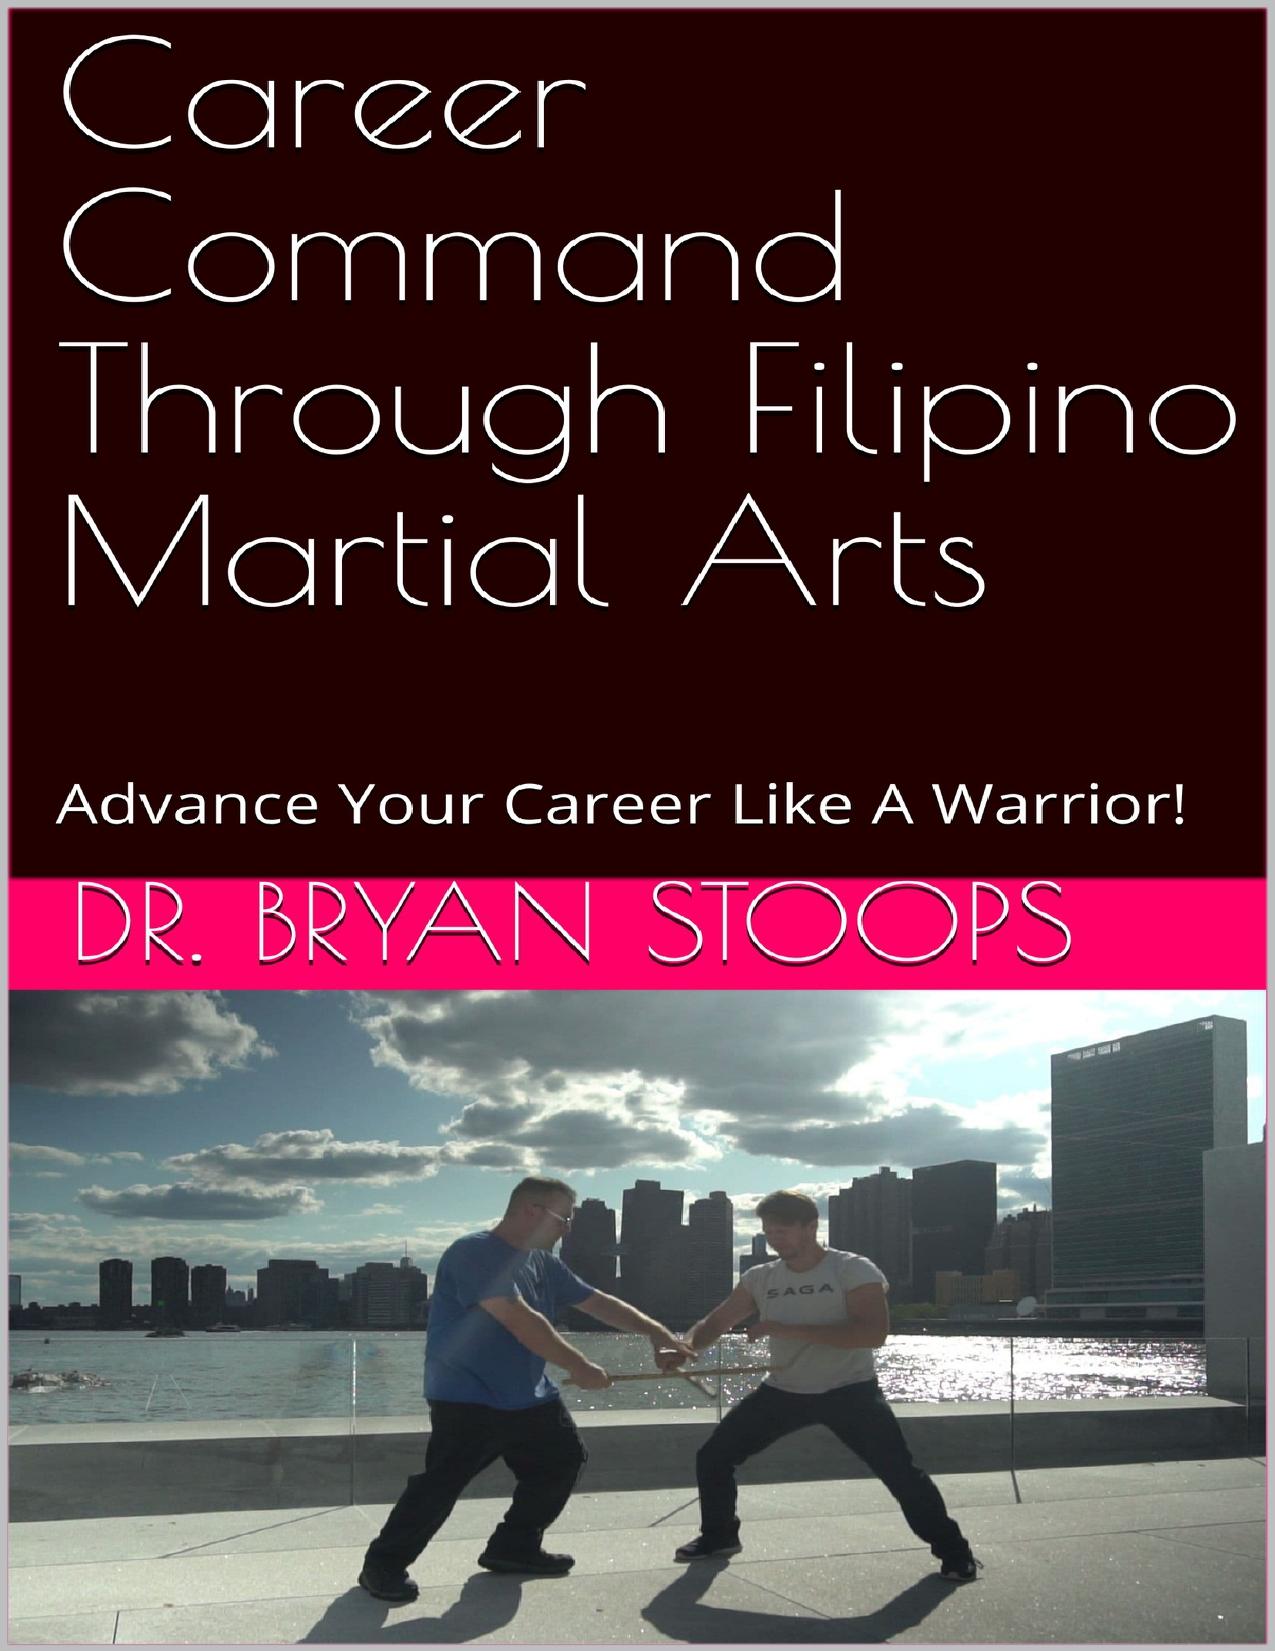 Career Command Through Filipino Martial Arts: Advance Your Career Like A Warrior! by Stoops Dr. Bryan